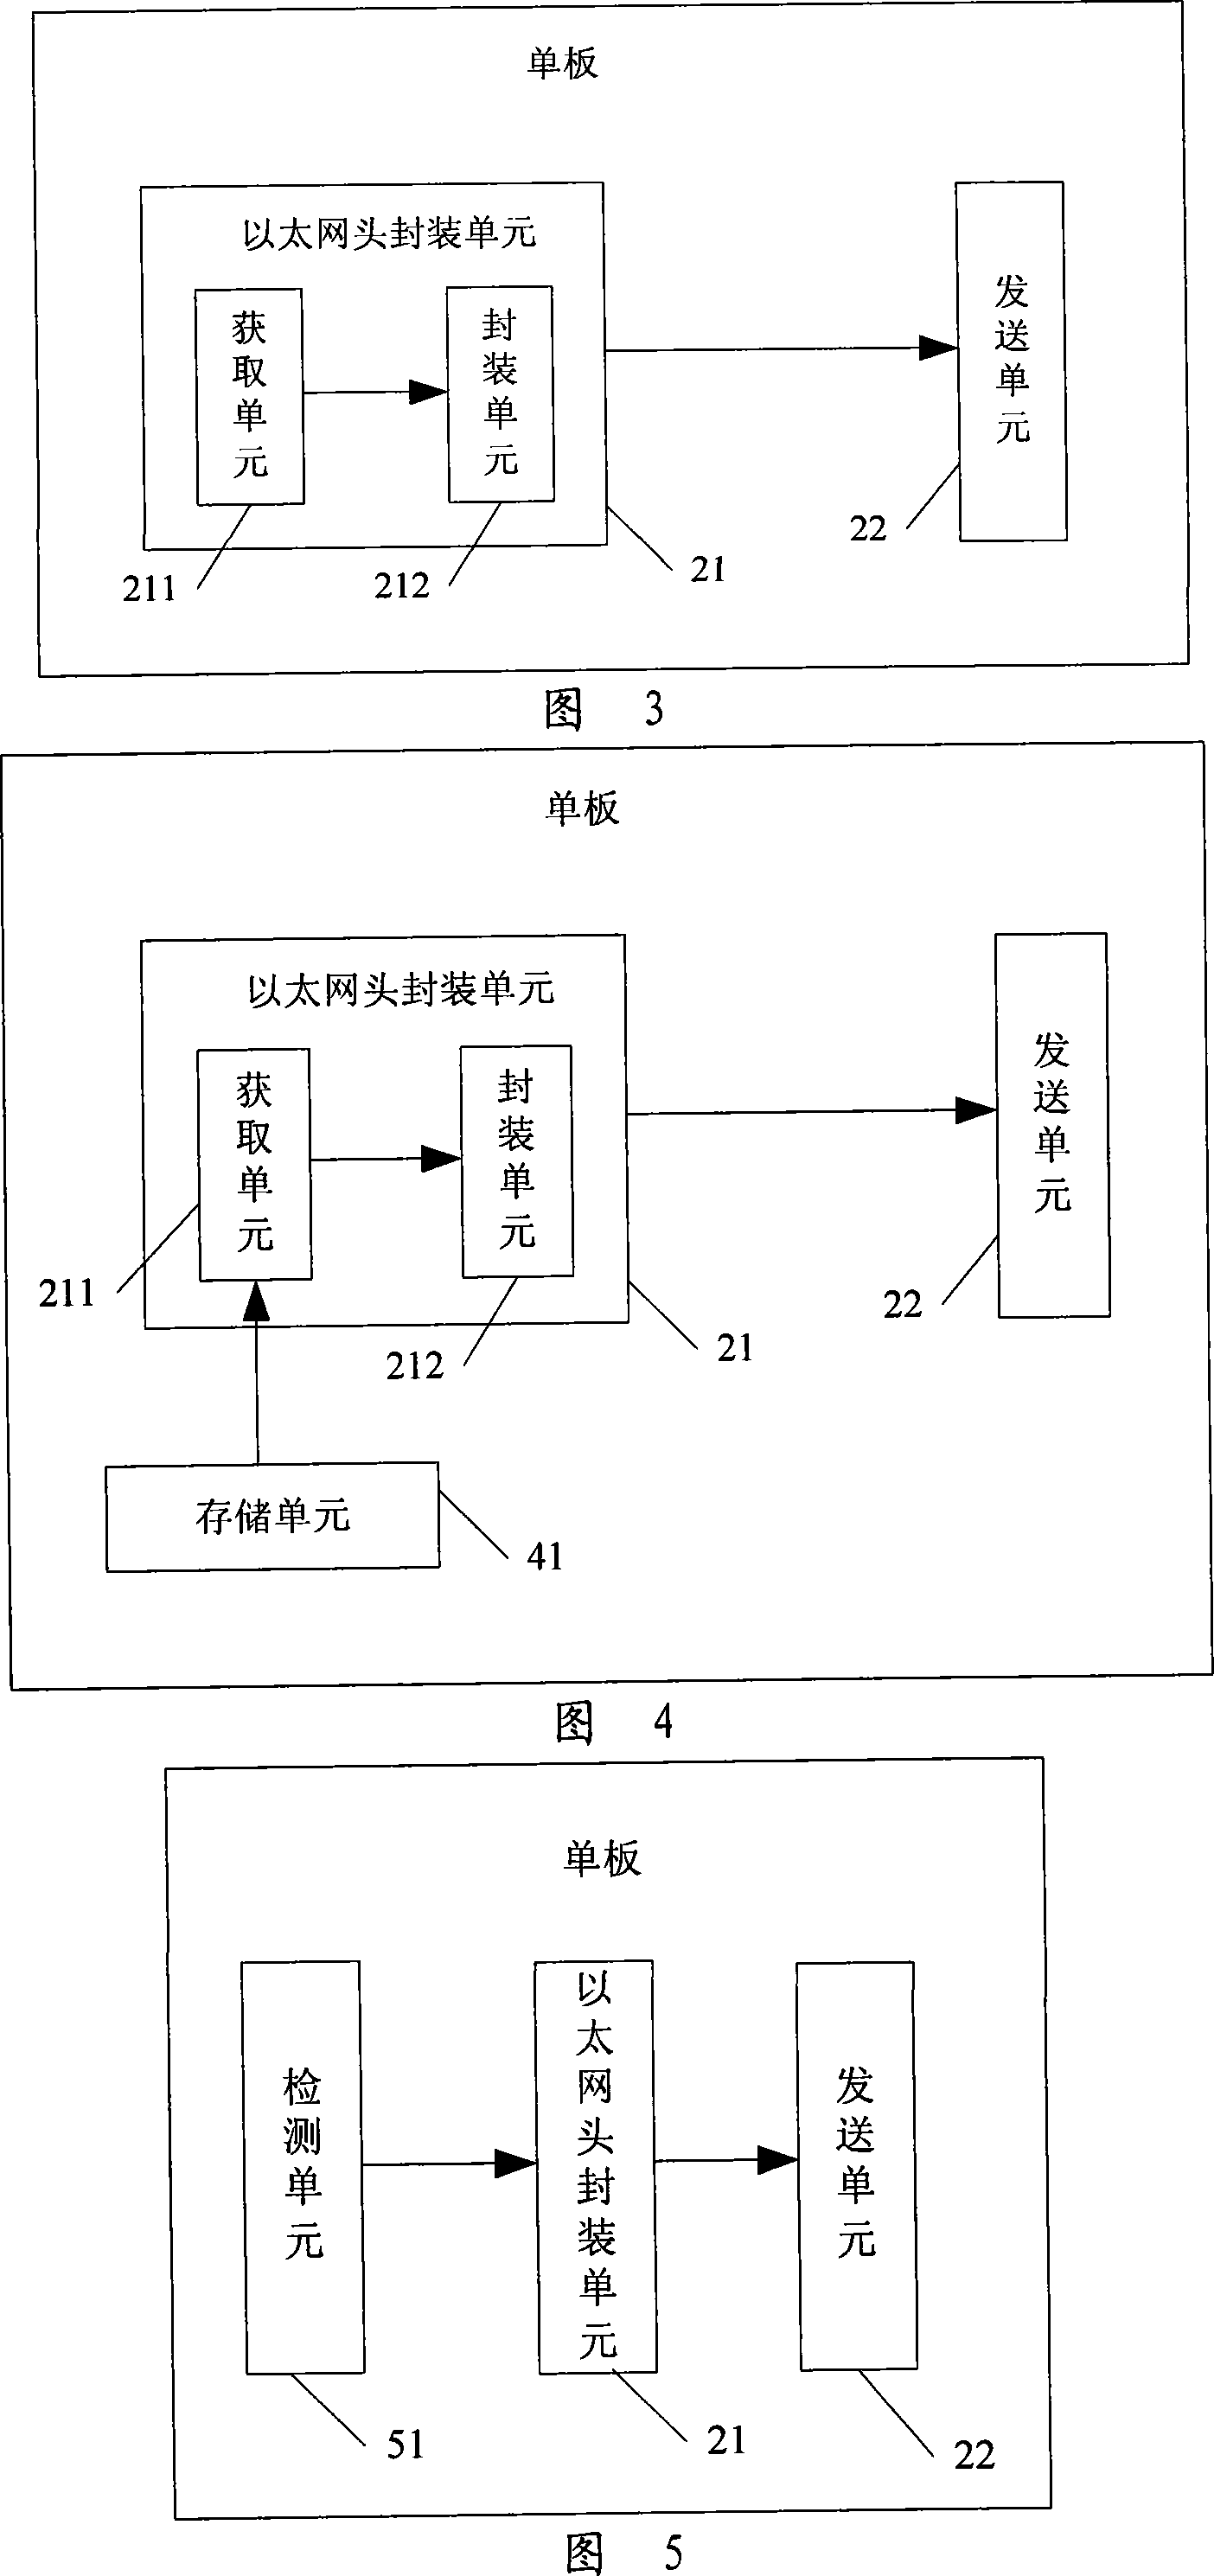 Inter-plate communication method, system and device